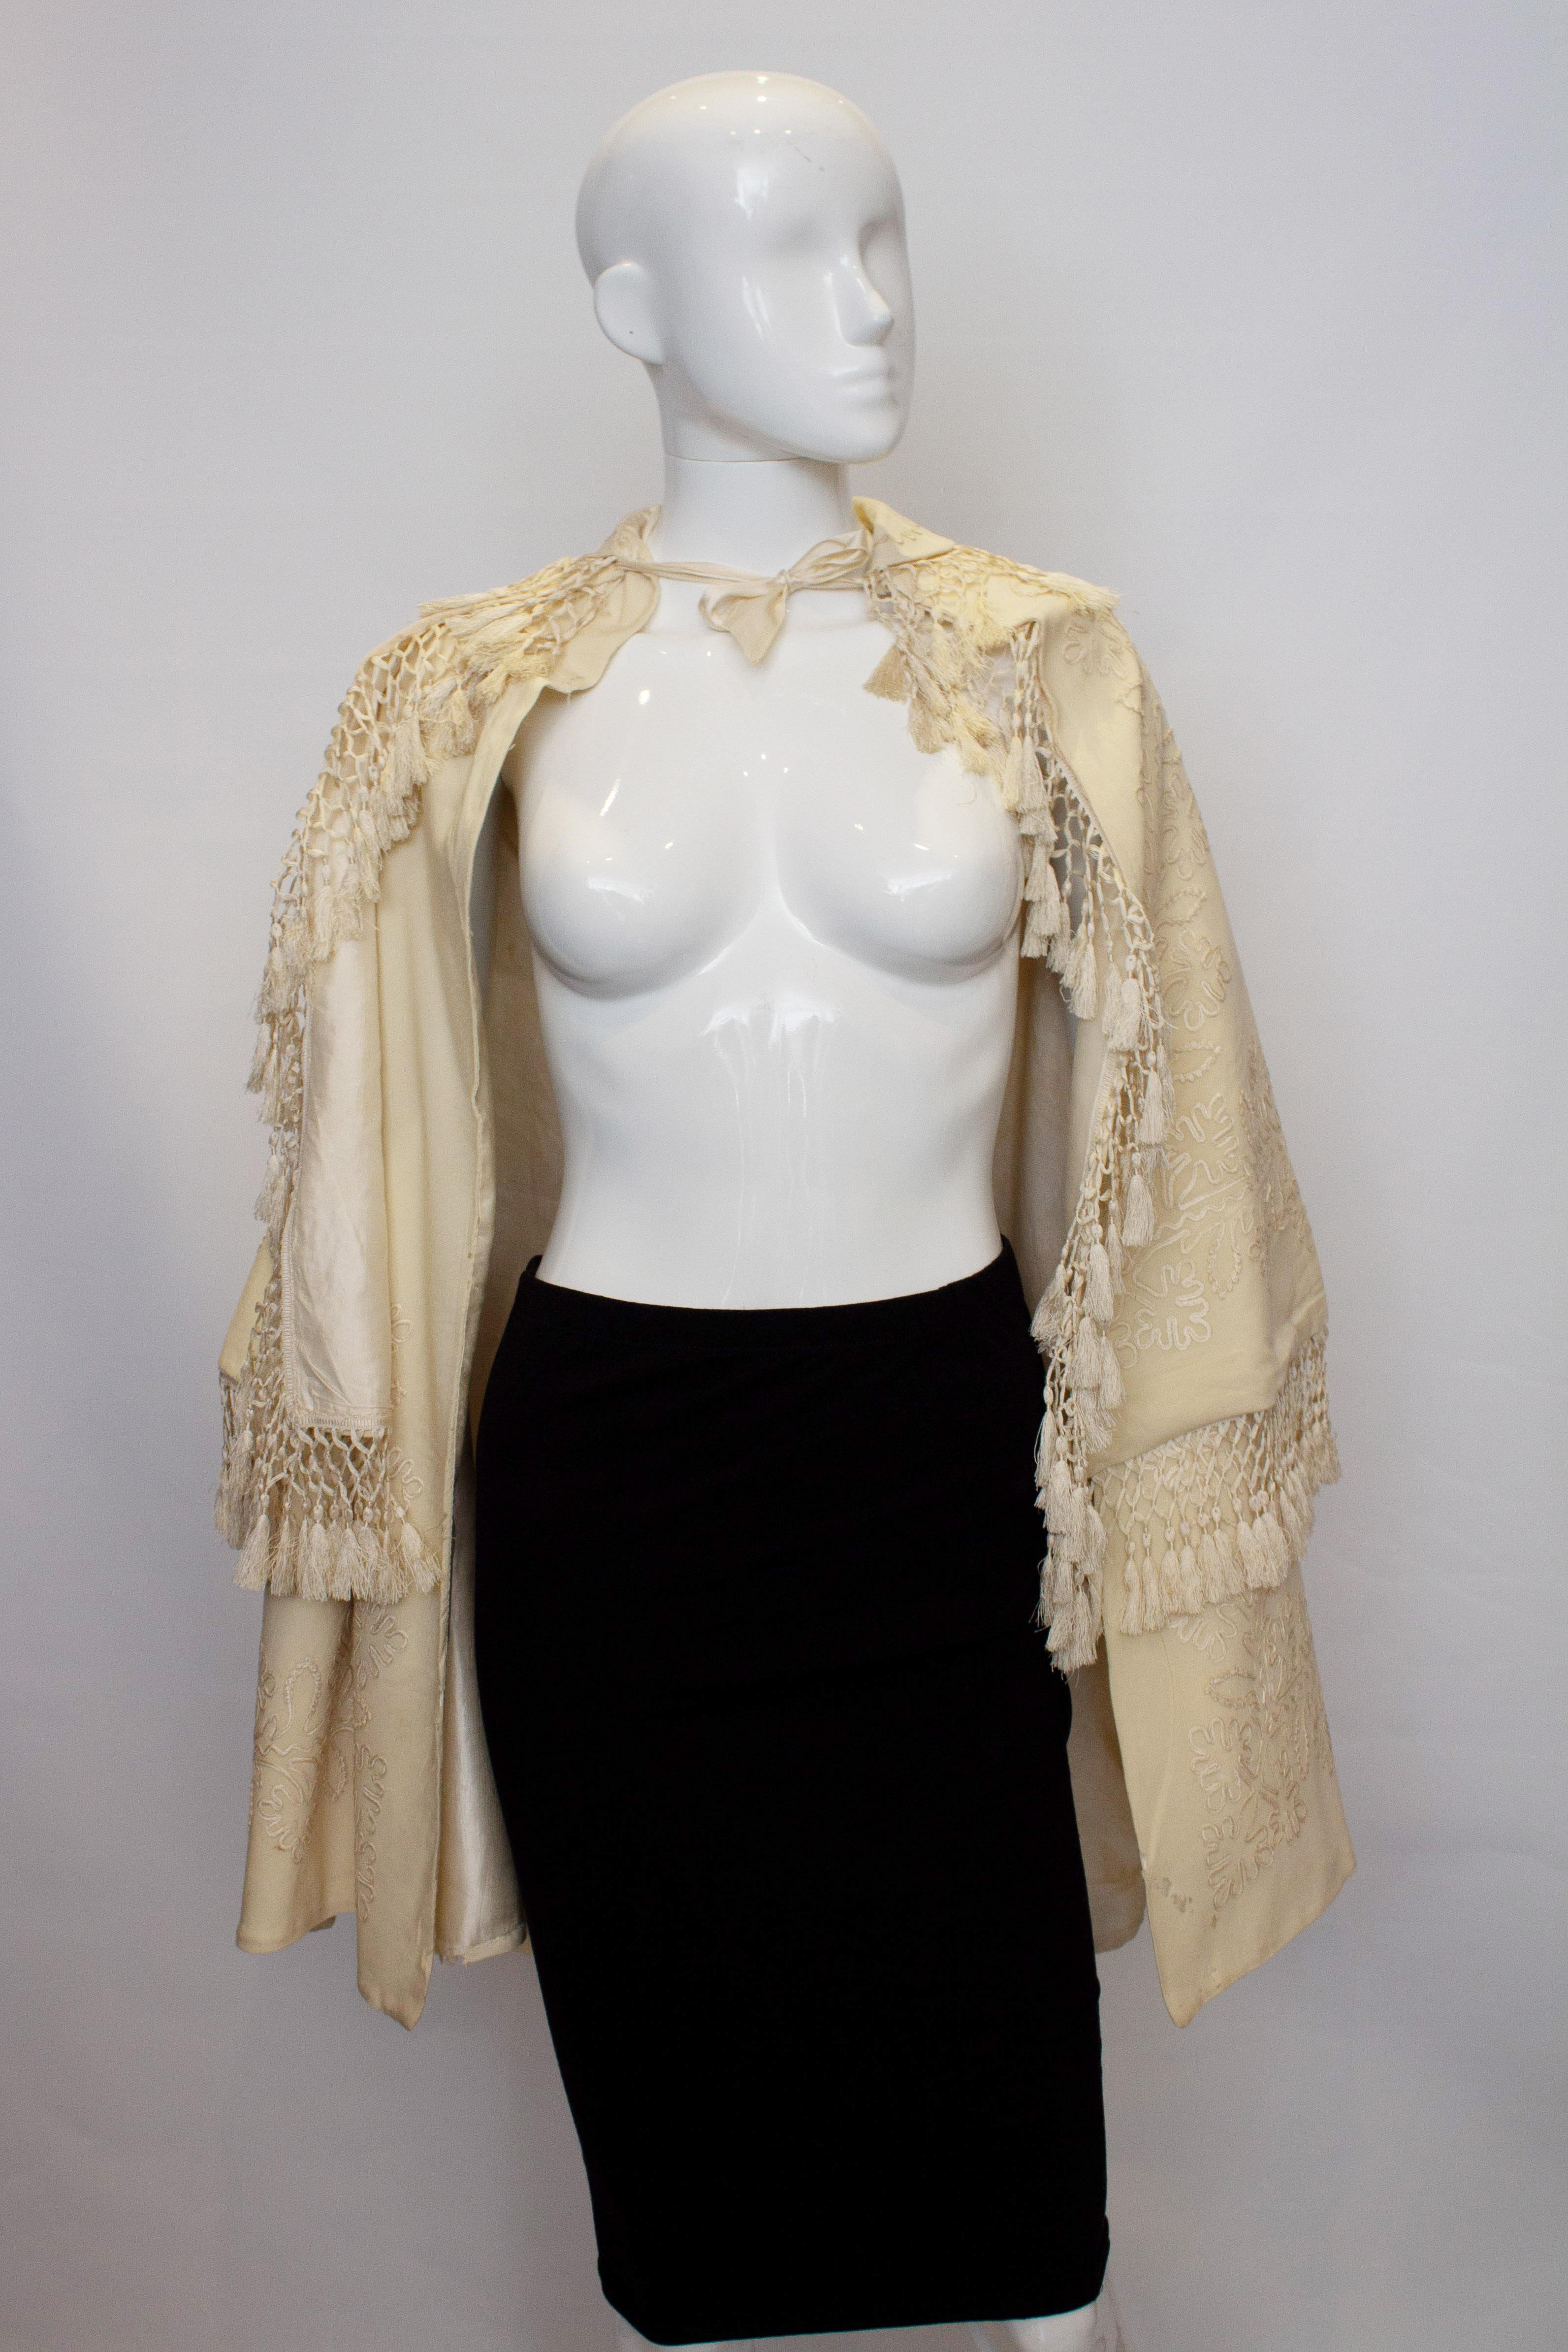 A stunning vintage white wool cape with embroidery and fringe detail. The jacket has a ribbon tie at the neck, and both the over and under cape are embroidered.
Measurements shoulder to shoulder 17'' length 37''